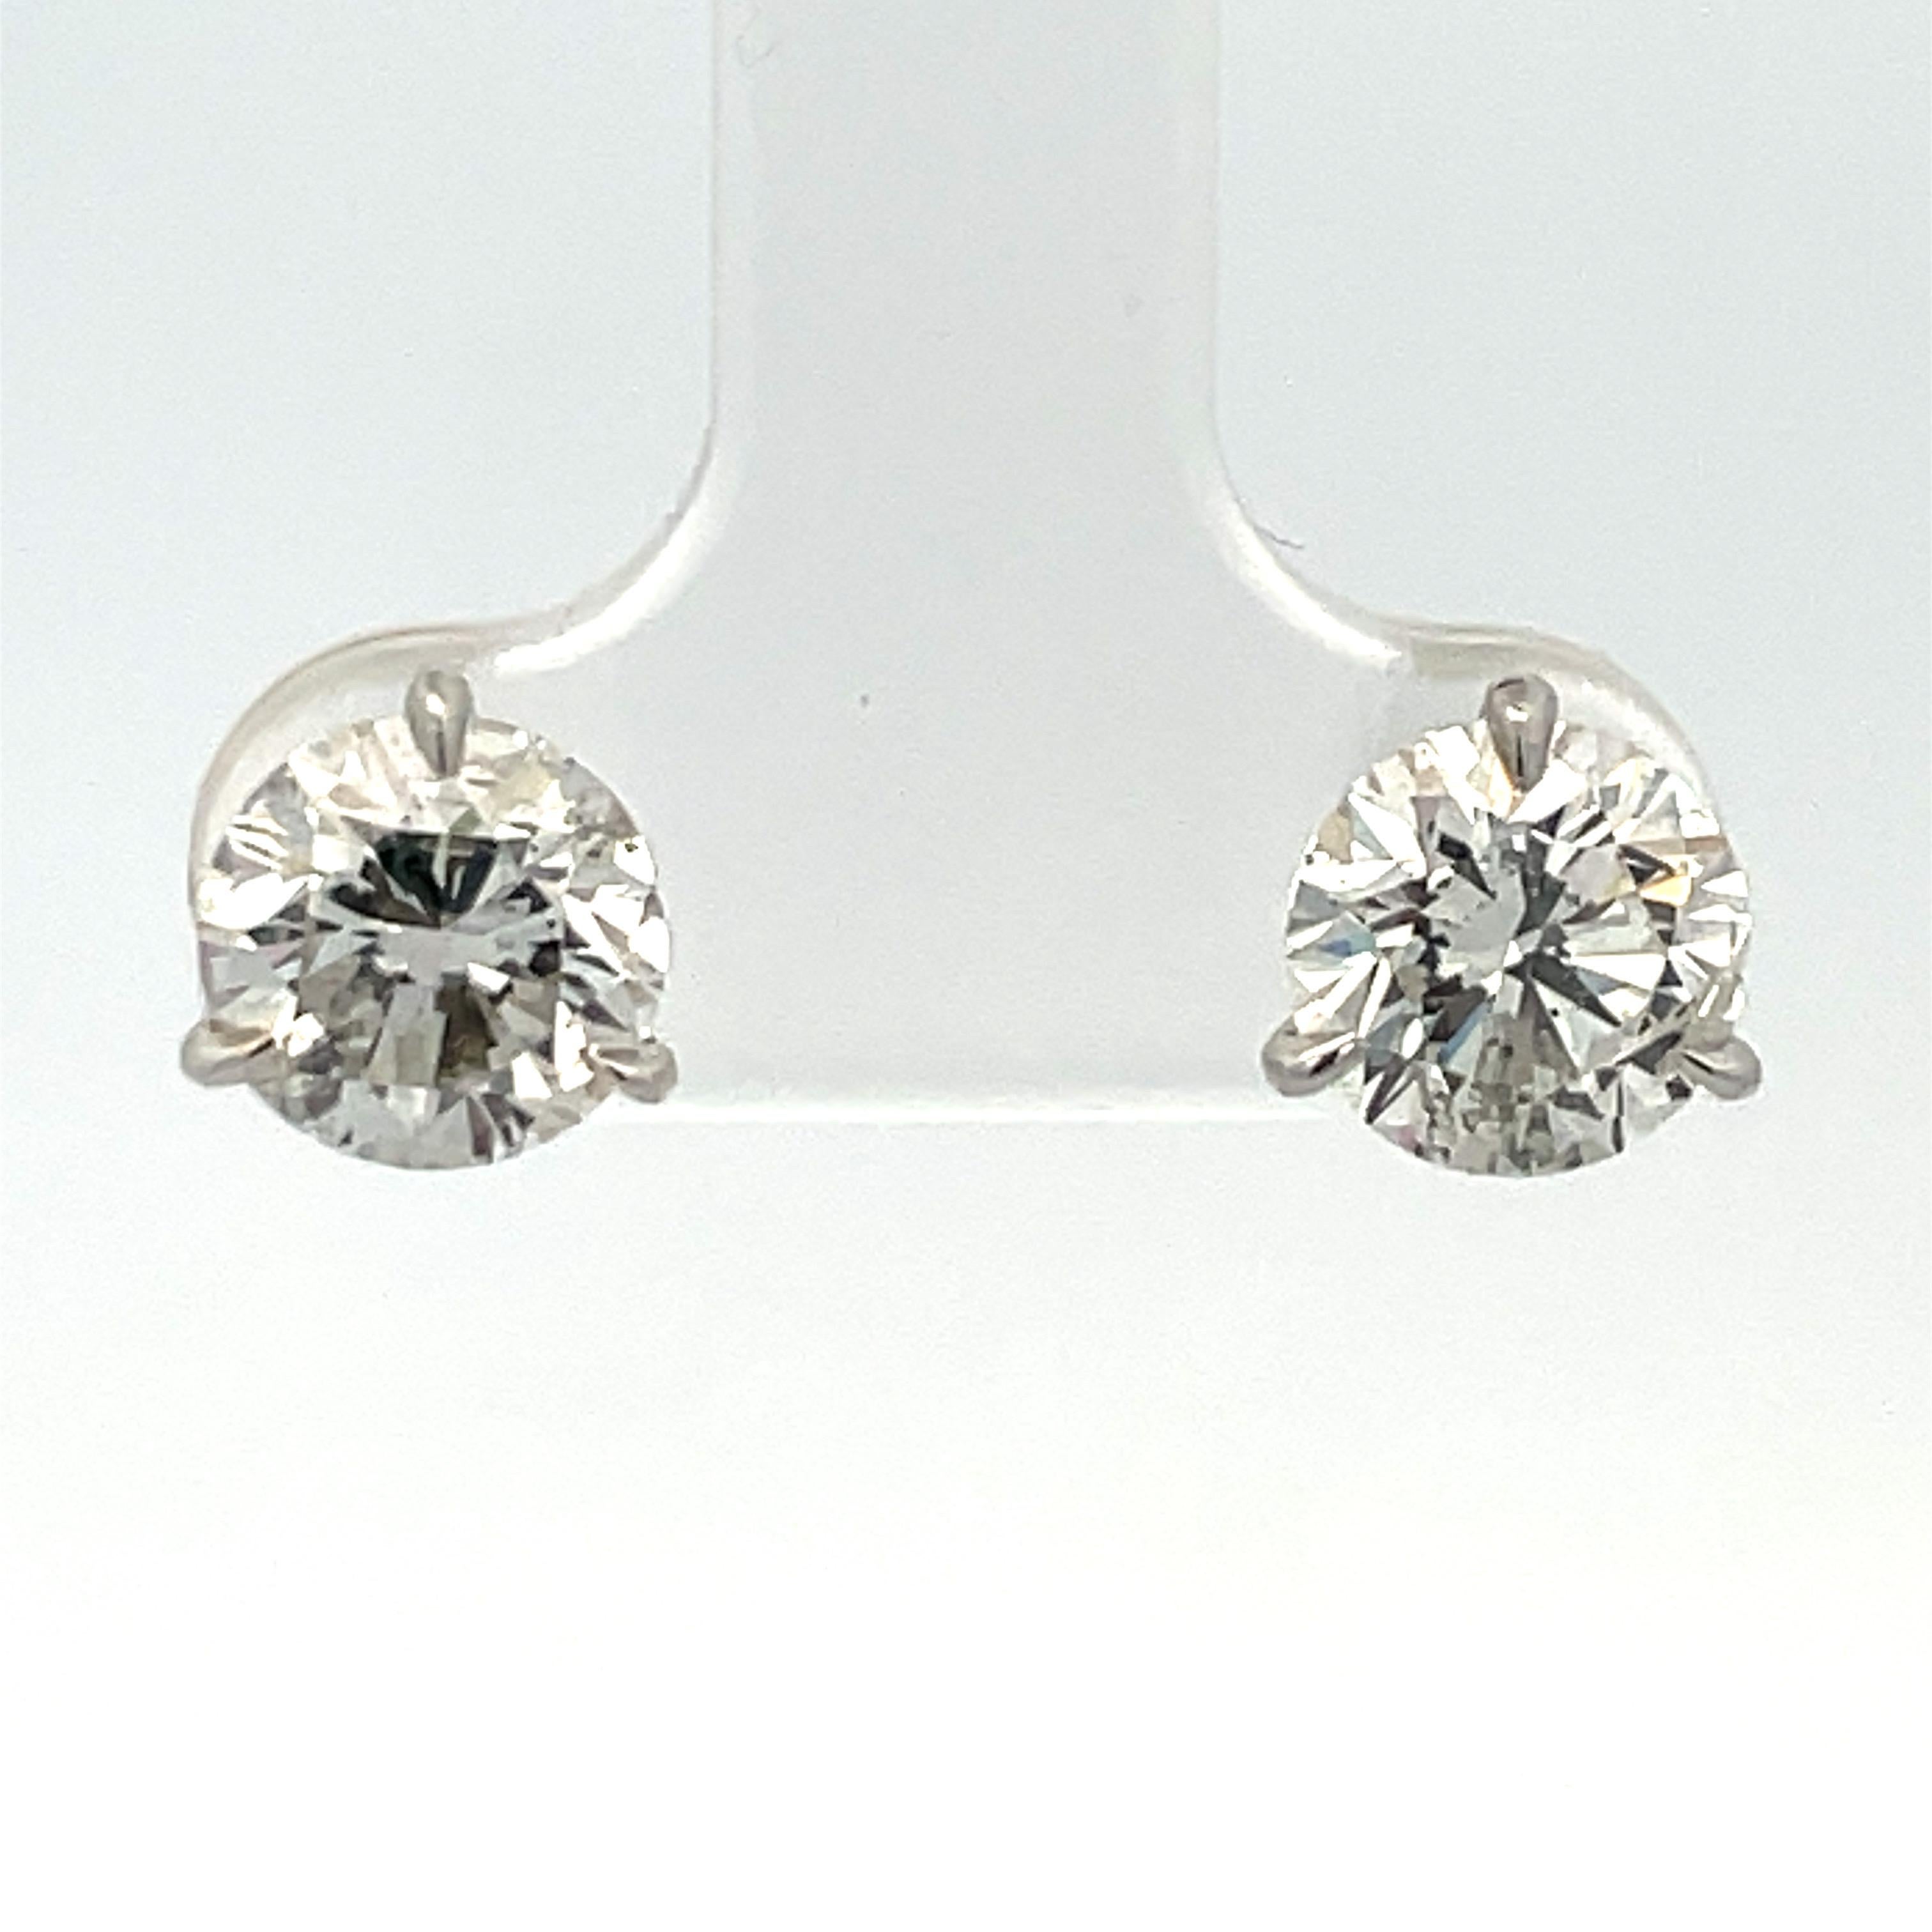 Contemporary Diamond Stud Earrings 3.14 Carats G-H I1 18 Karat White Gold Champagne Setting For Sale